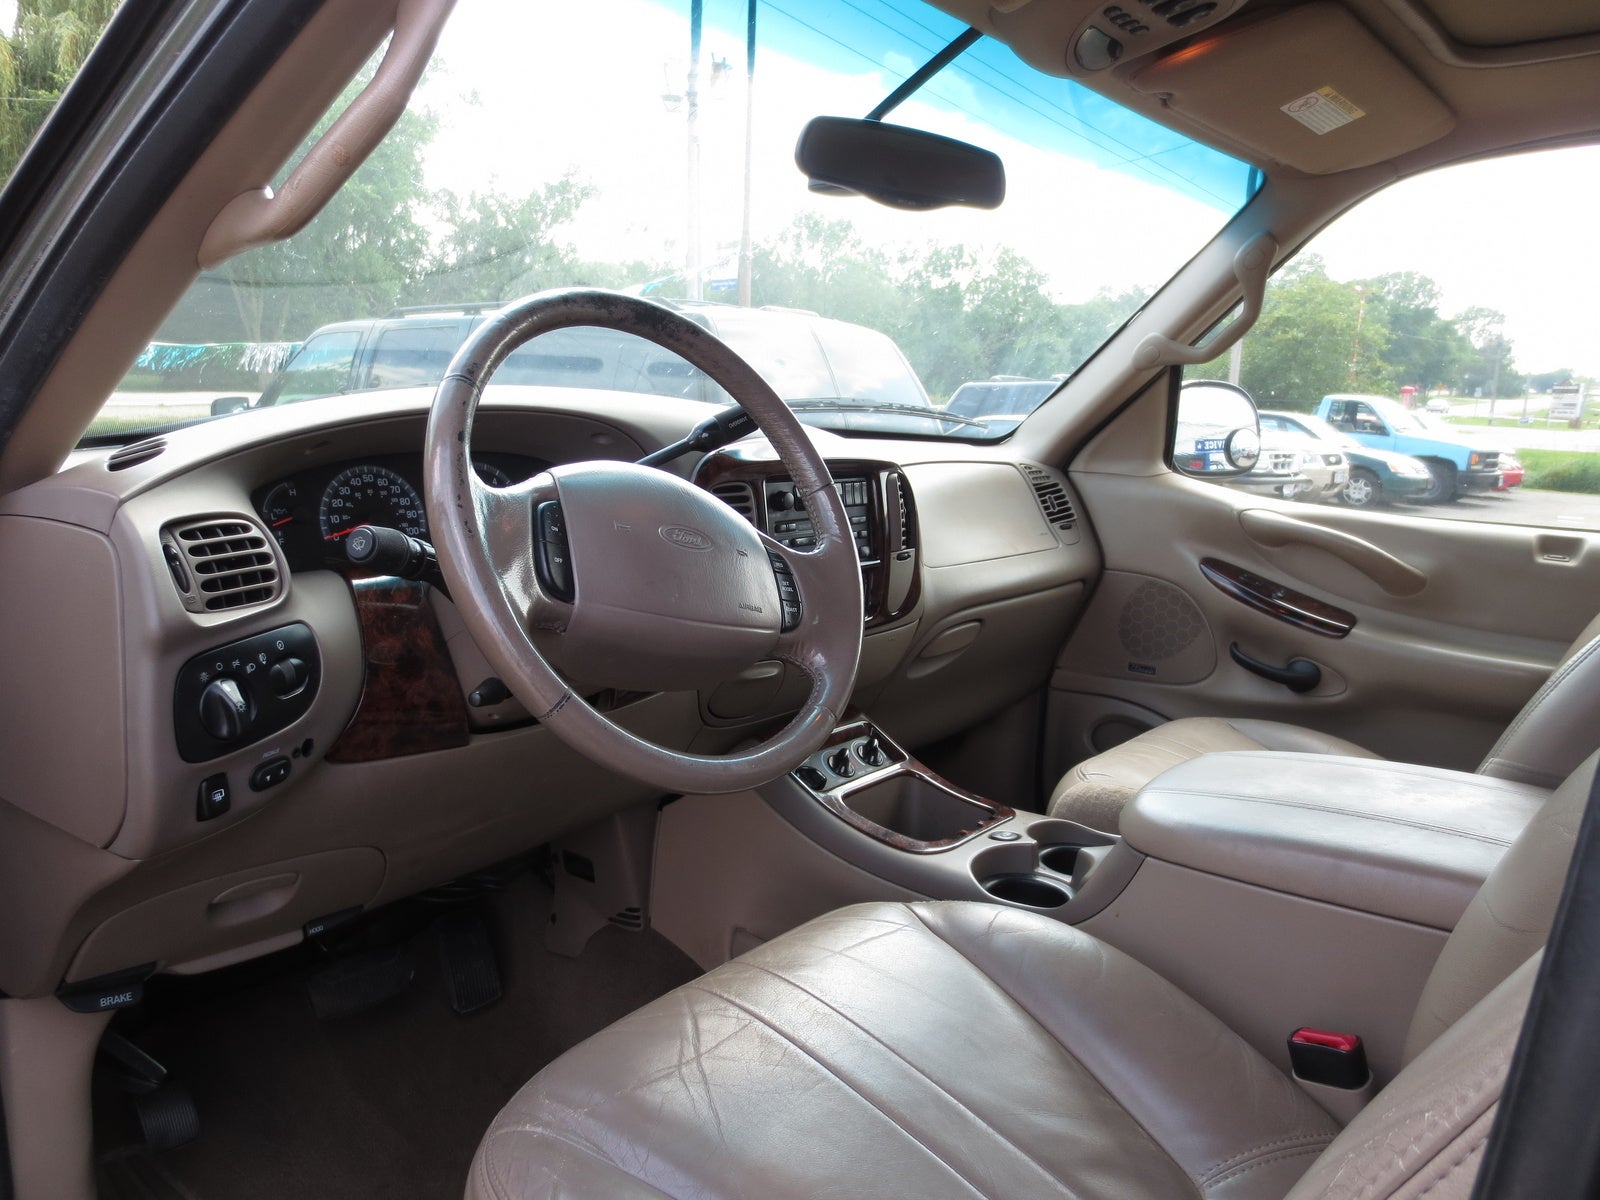 2000 Ford expedition interior #5